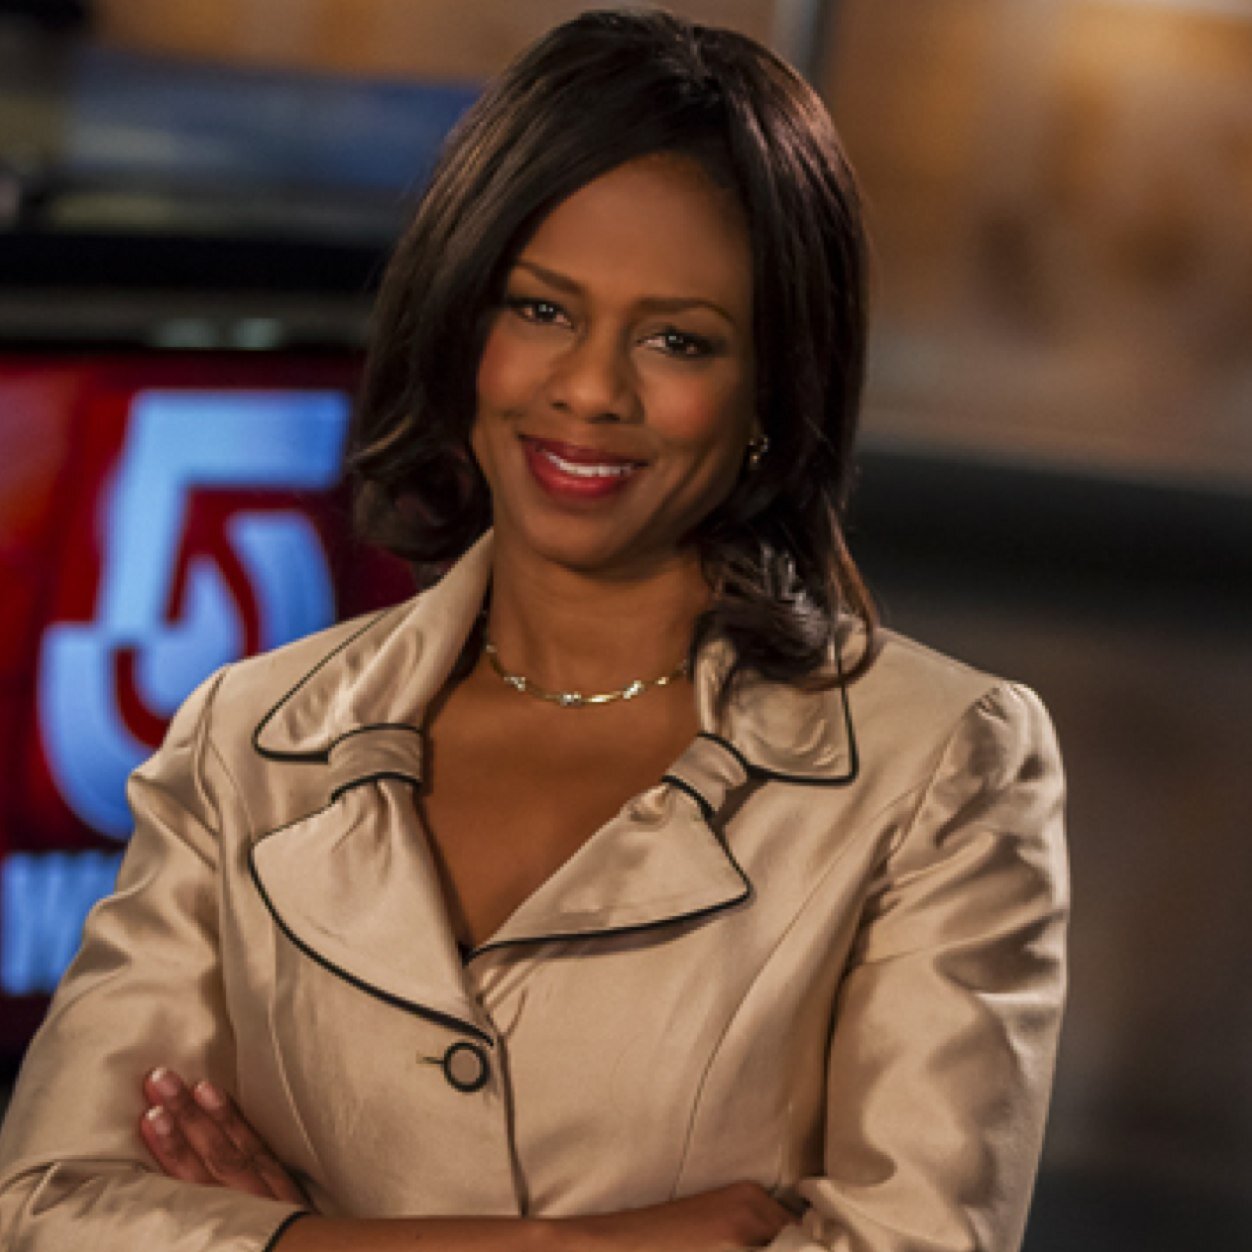 Emmy Award winning Anchor/Reporter for WCVB-TV Newscenter 5. Opinions and links are my own. RT don't = endorsements. Always digging for news & game for fun!